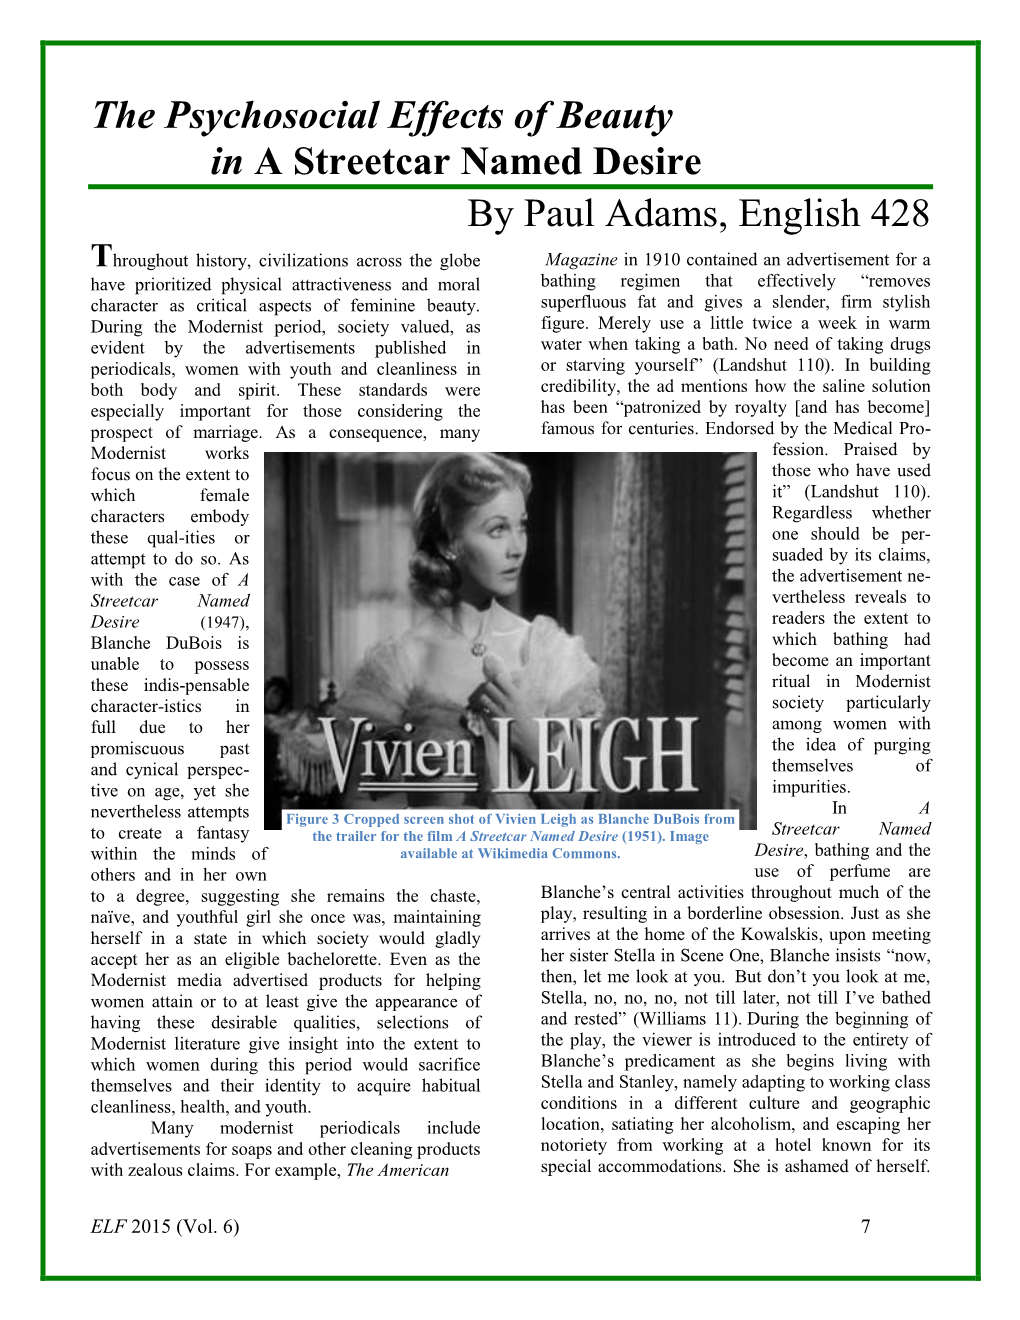 The Psychosocial Effects of Beauty in a Streetcar Named Desire by Paul Adams, English 428